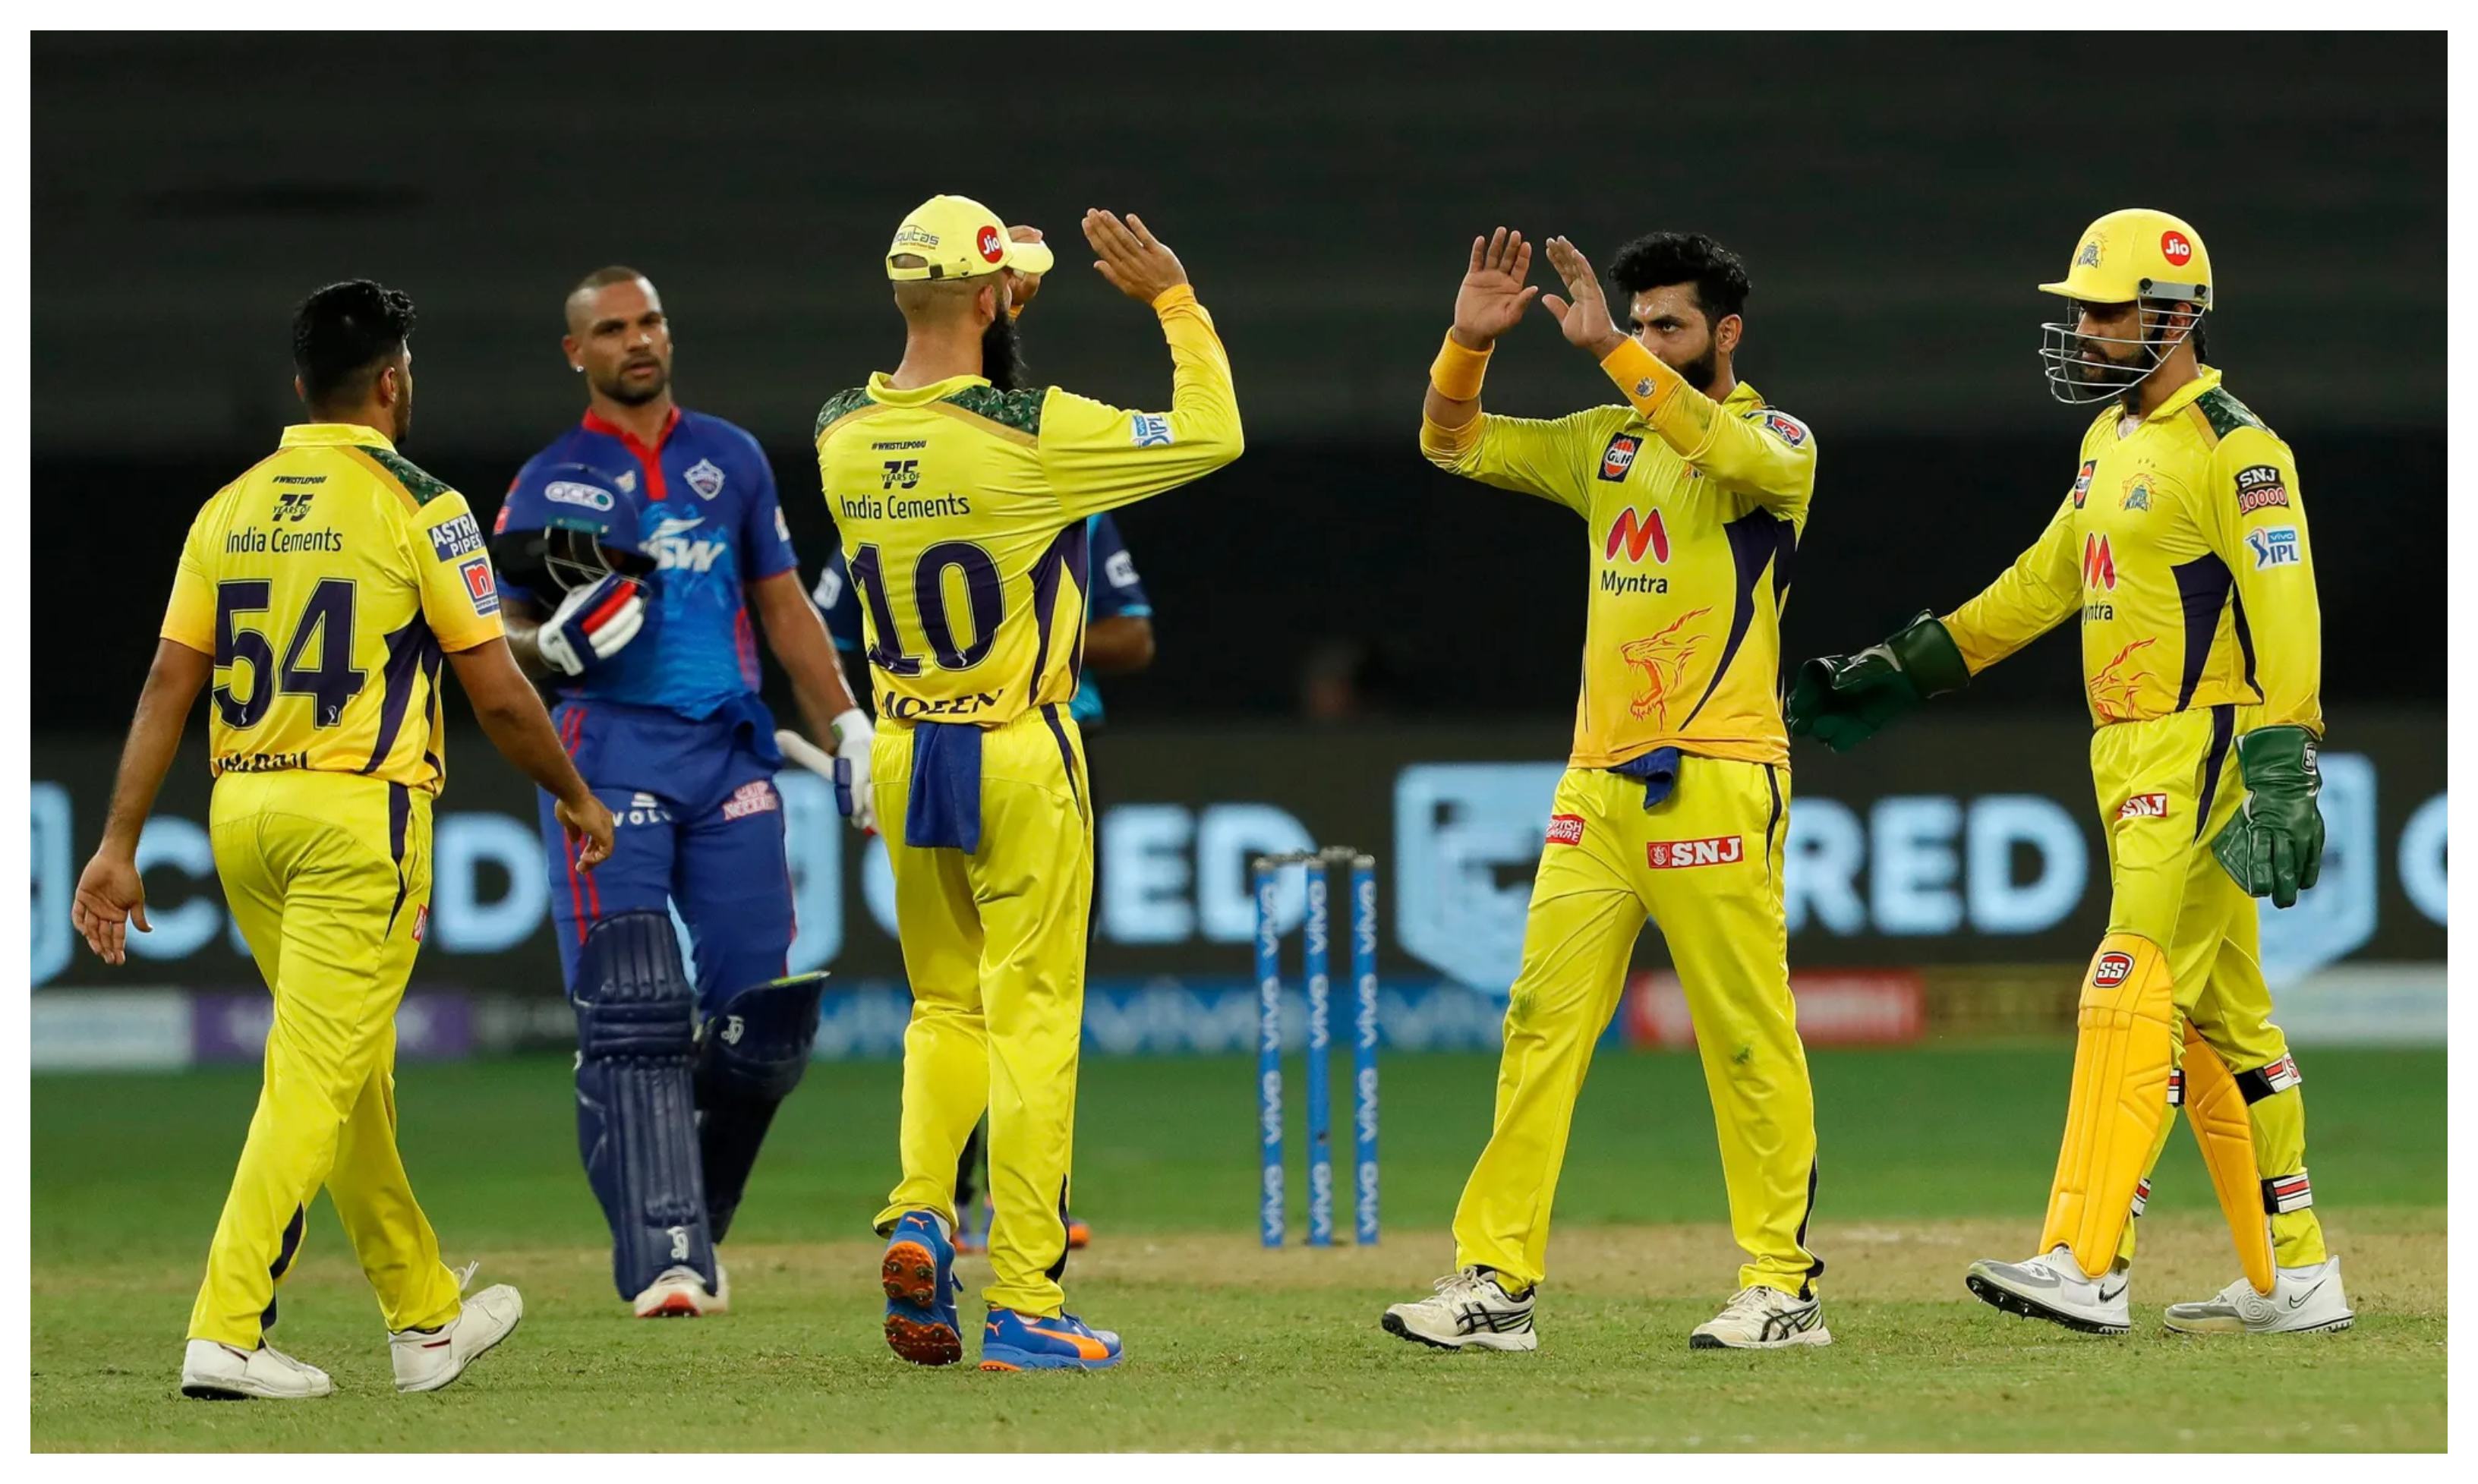 The match between DC and CSK went down the wire | BCCI/IPL